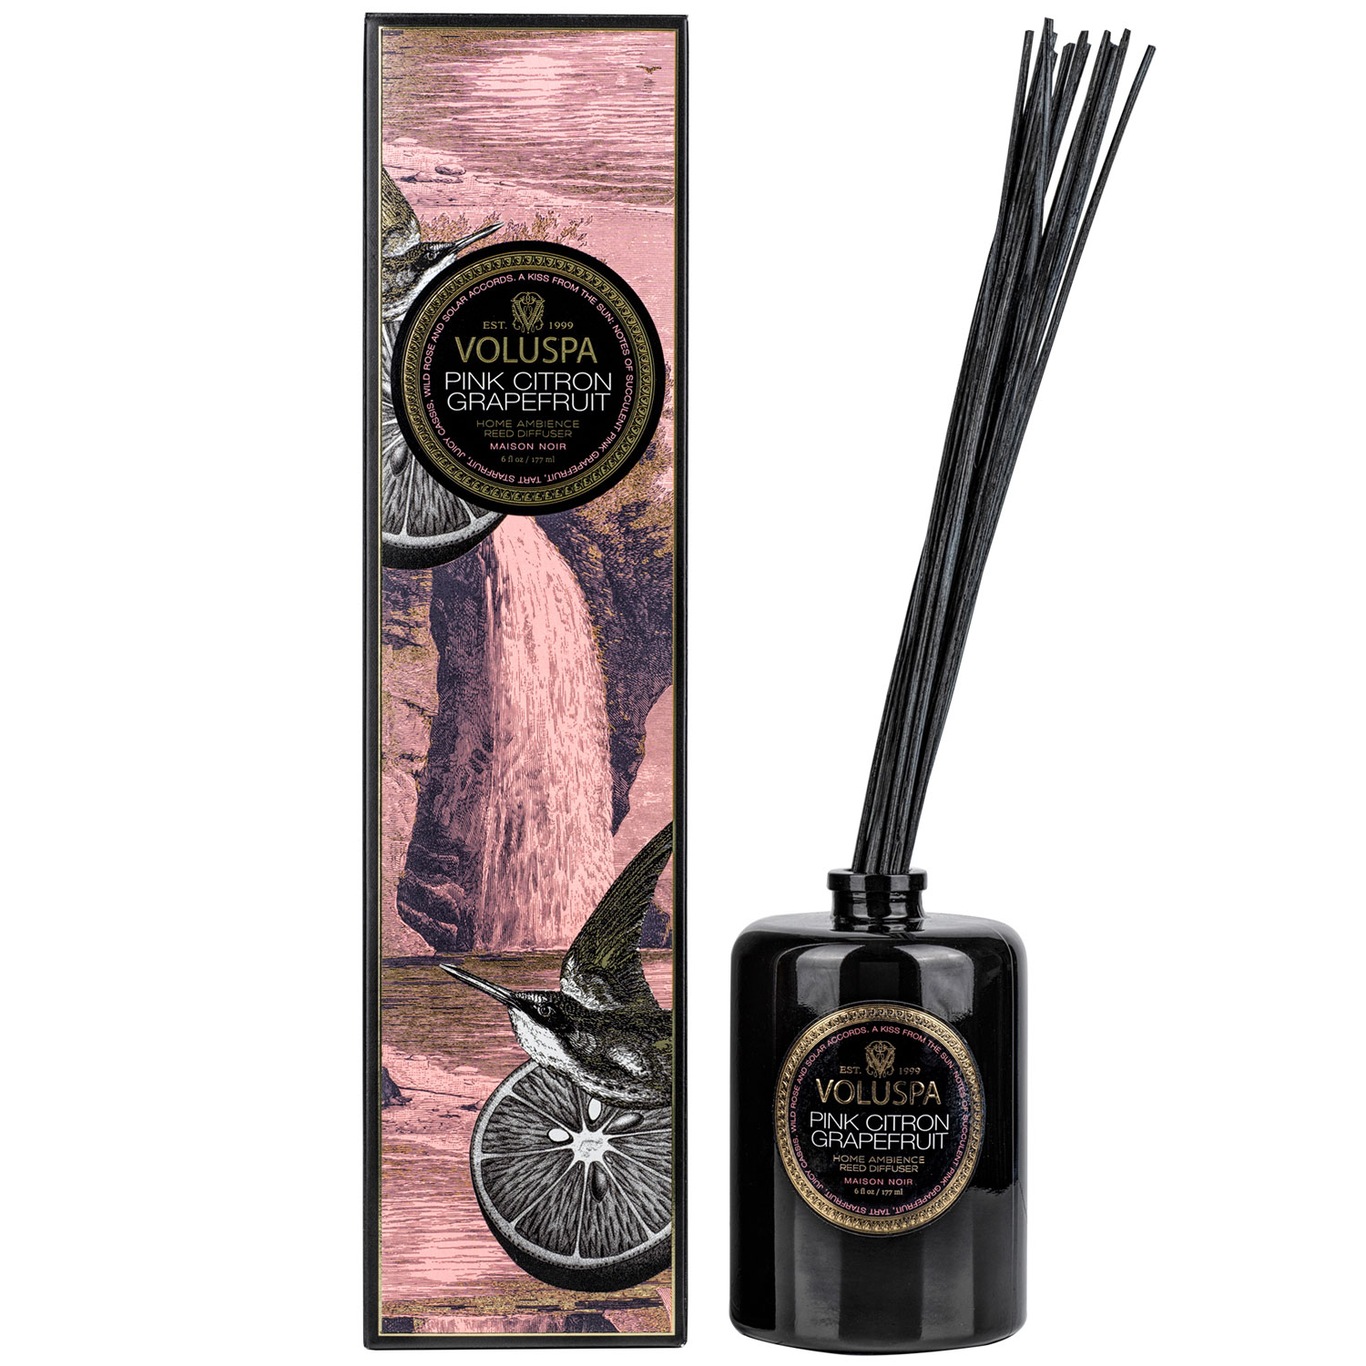 Maison Reed Fragrance Diffusers 177 ml, Pink Citron Grapefruit